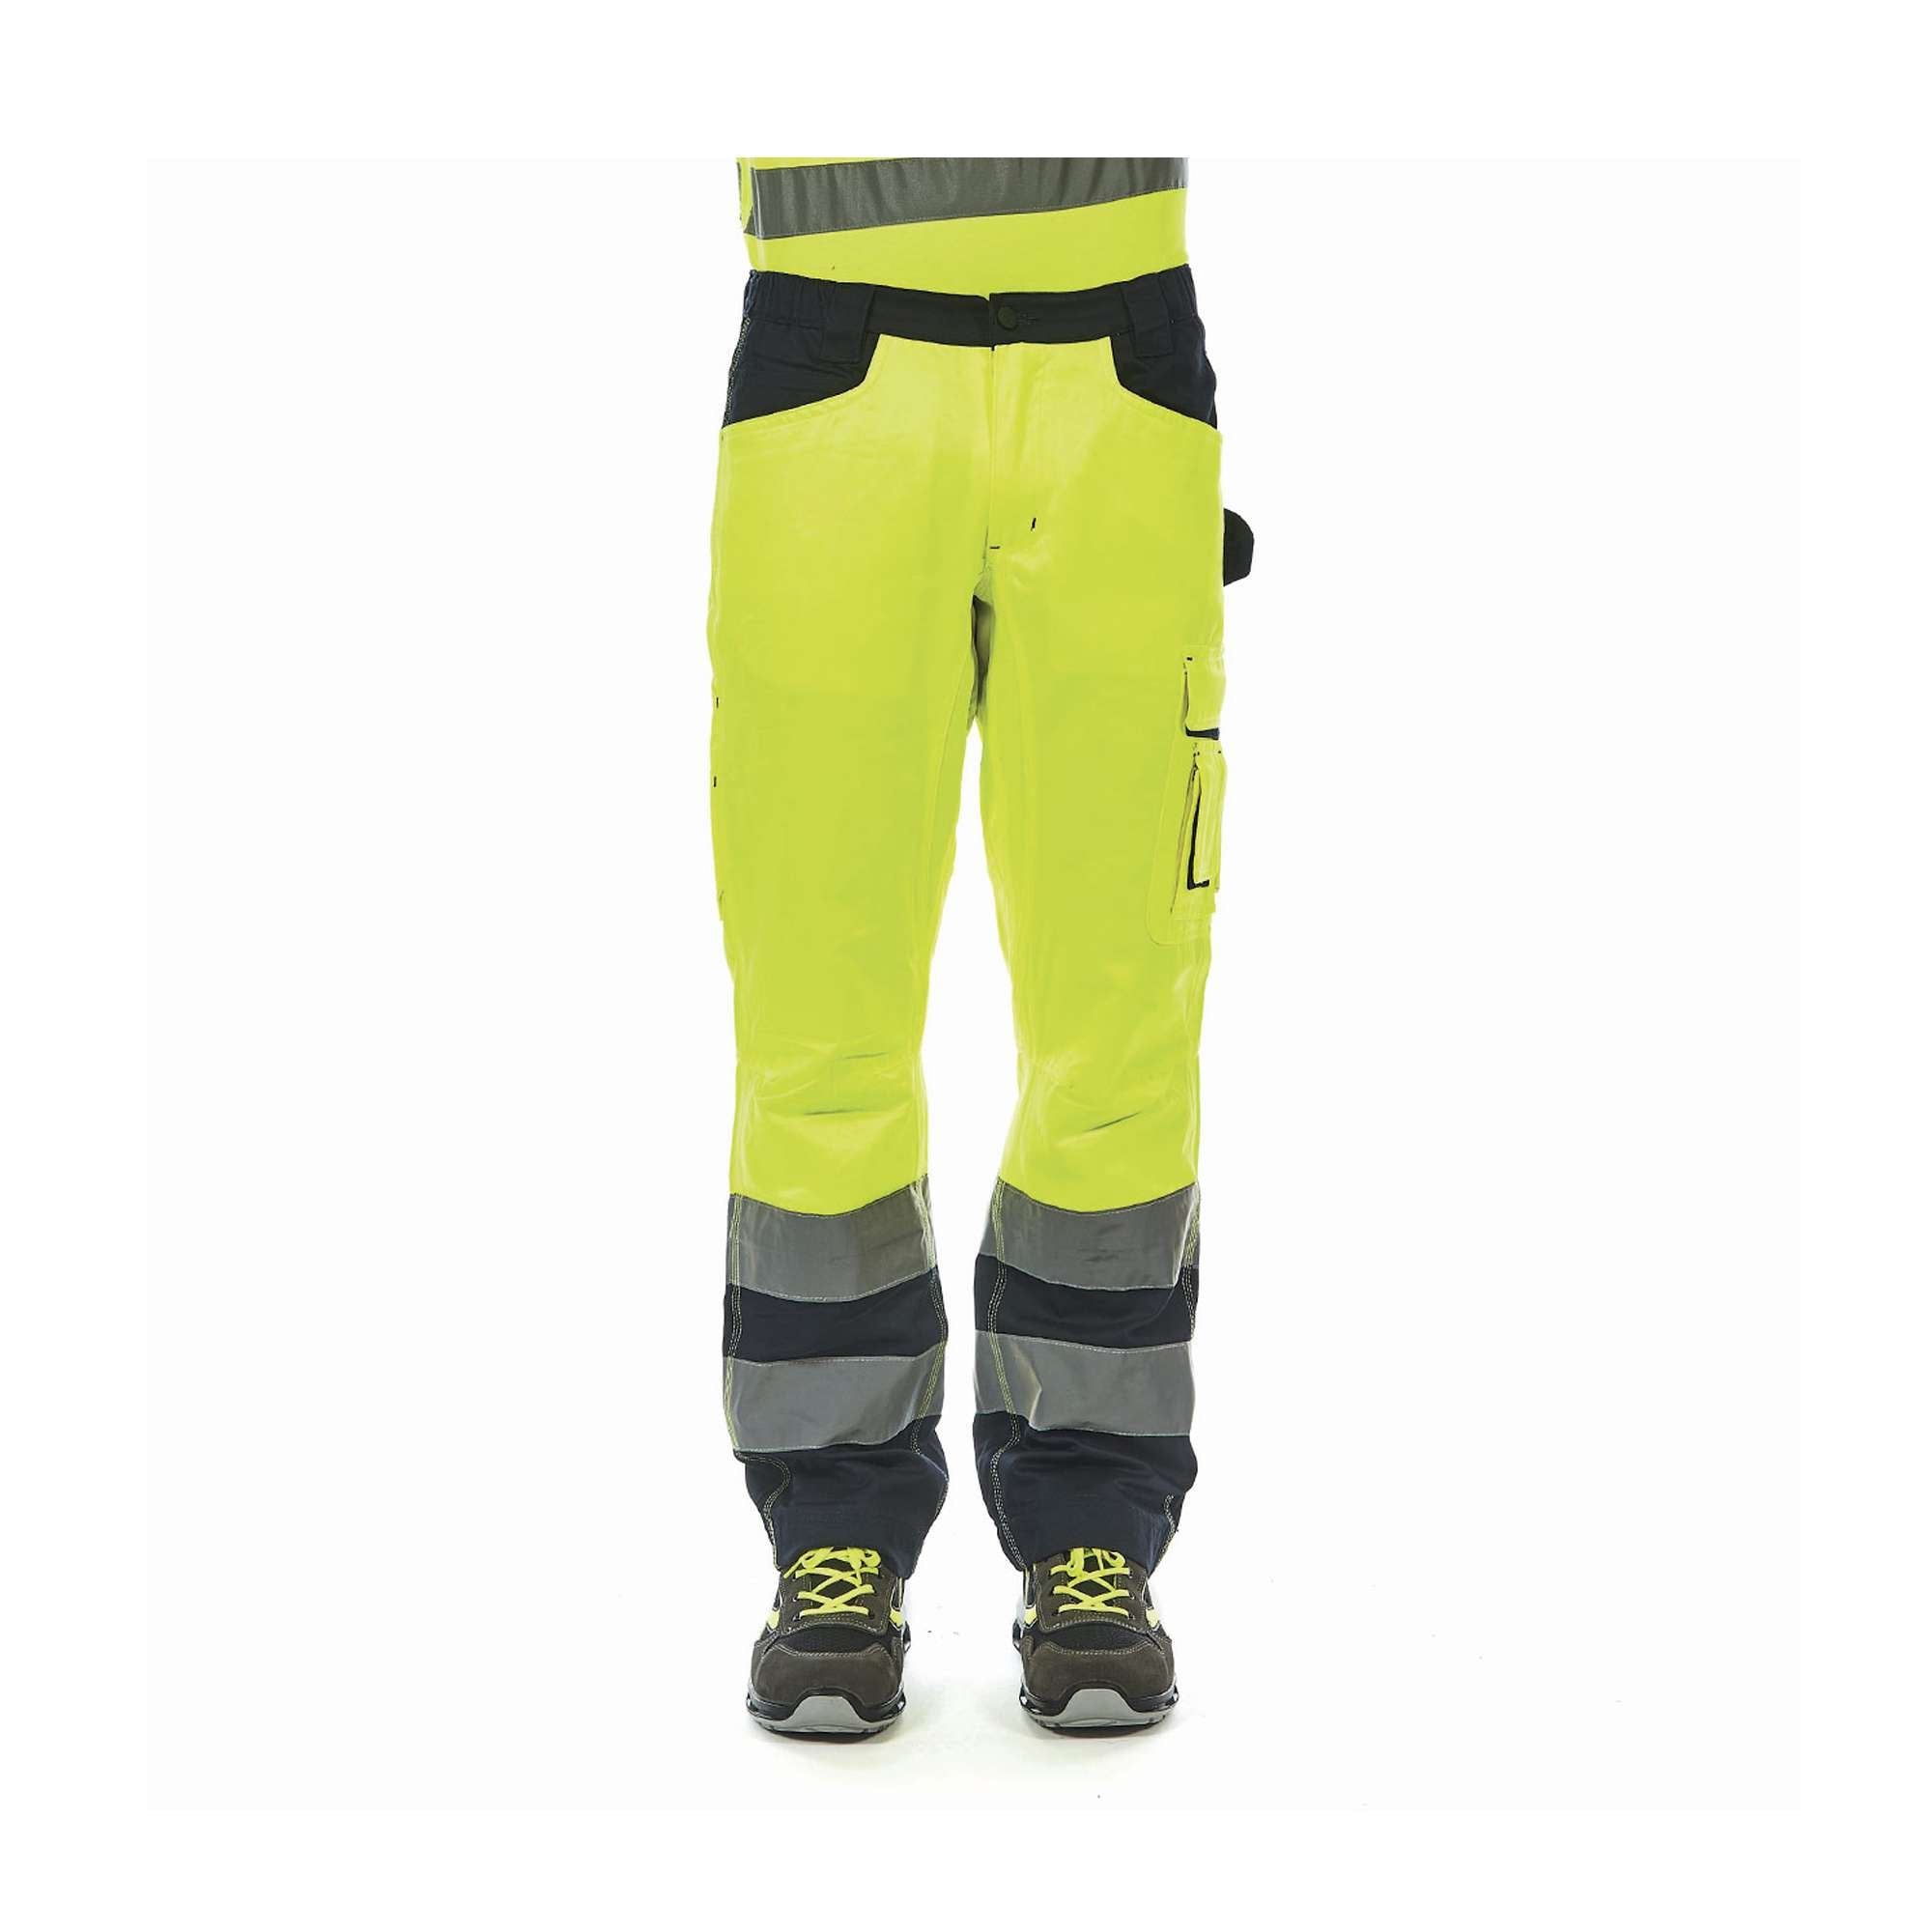 Work trousers RADIANT Yellow Fluo Reflective stripes Size L - U-Power